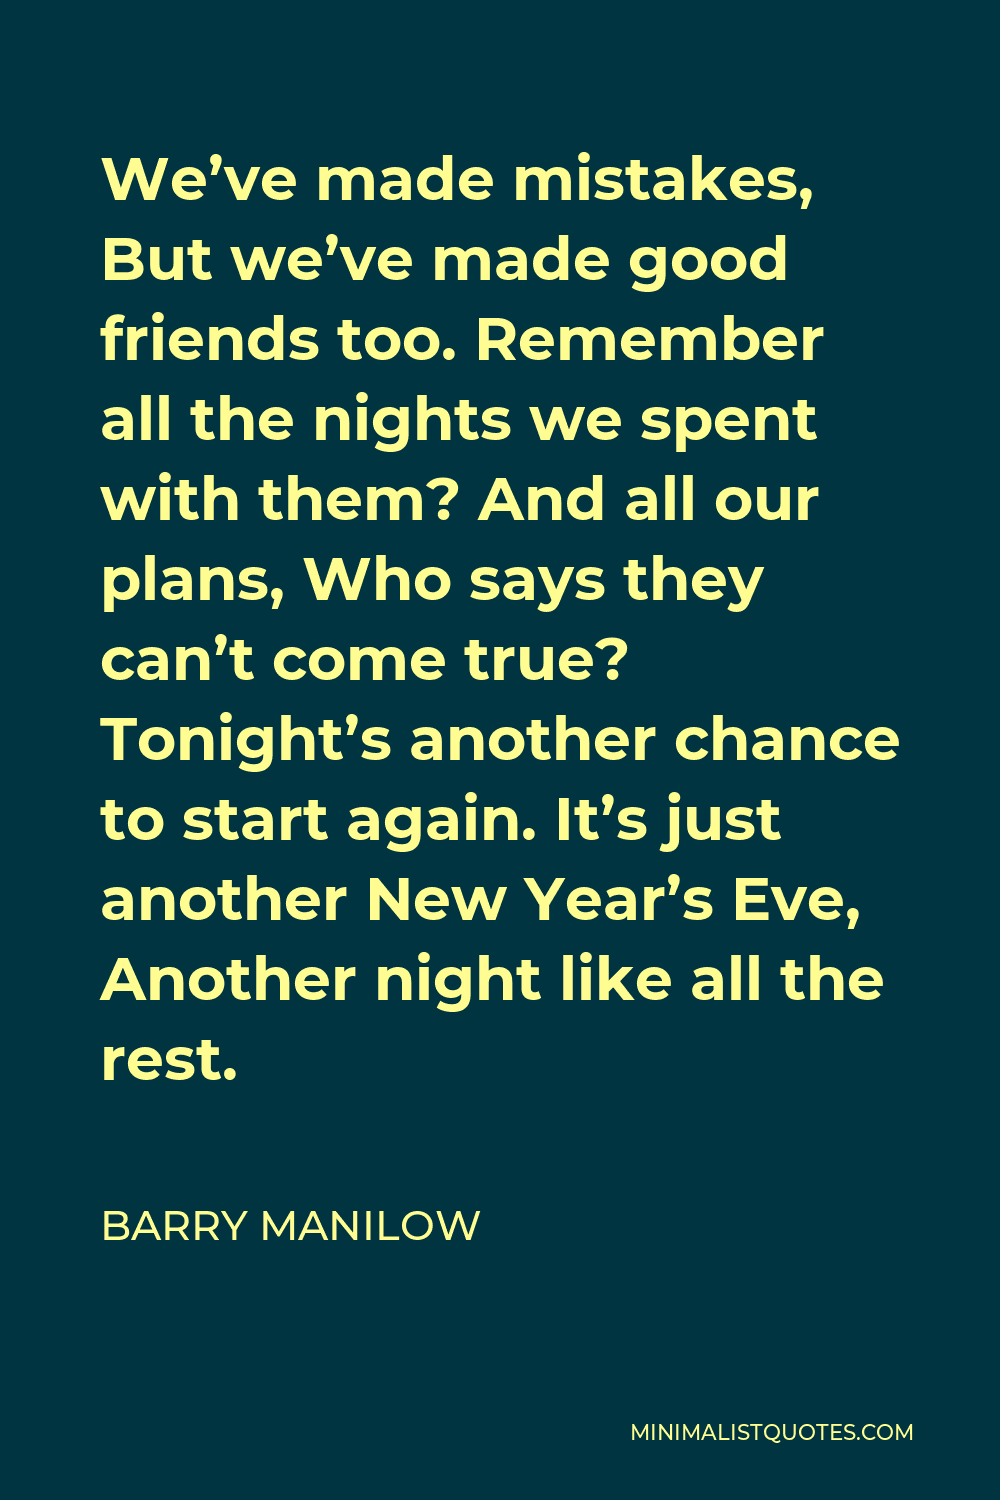 Barry Manilow Quote - We’ve made mistakes, But we’ve made good friends too. Remember all the nights we spent with them? And all our plans, Who says they can’t come true? Tonight’s another chance to start again. It’s just another New Year’s Eve, Another night like all the rest.